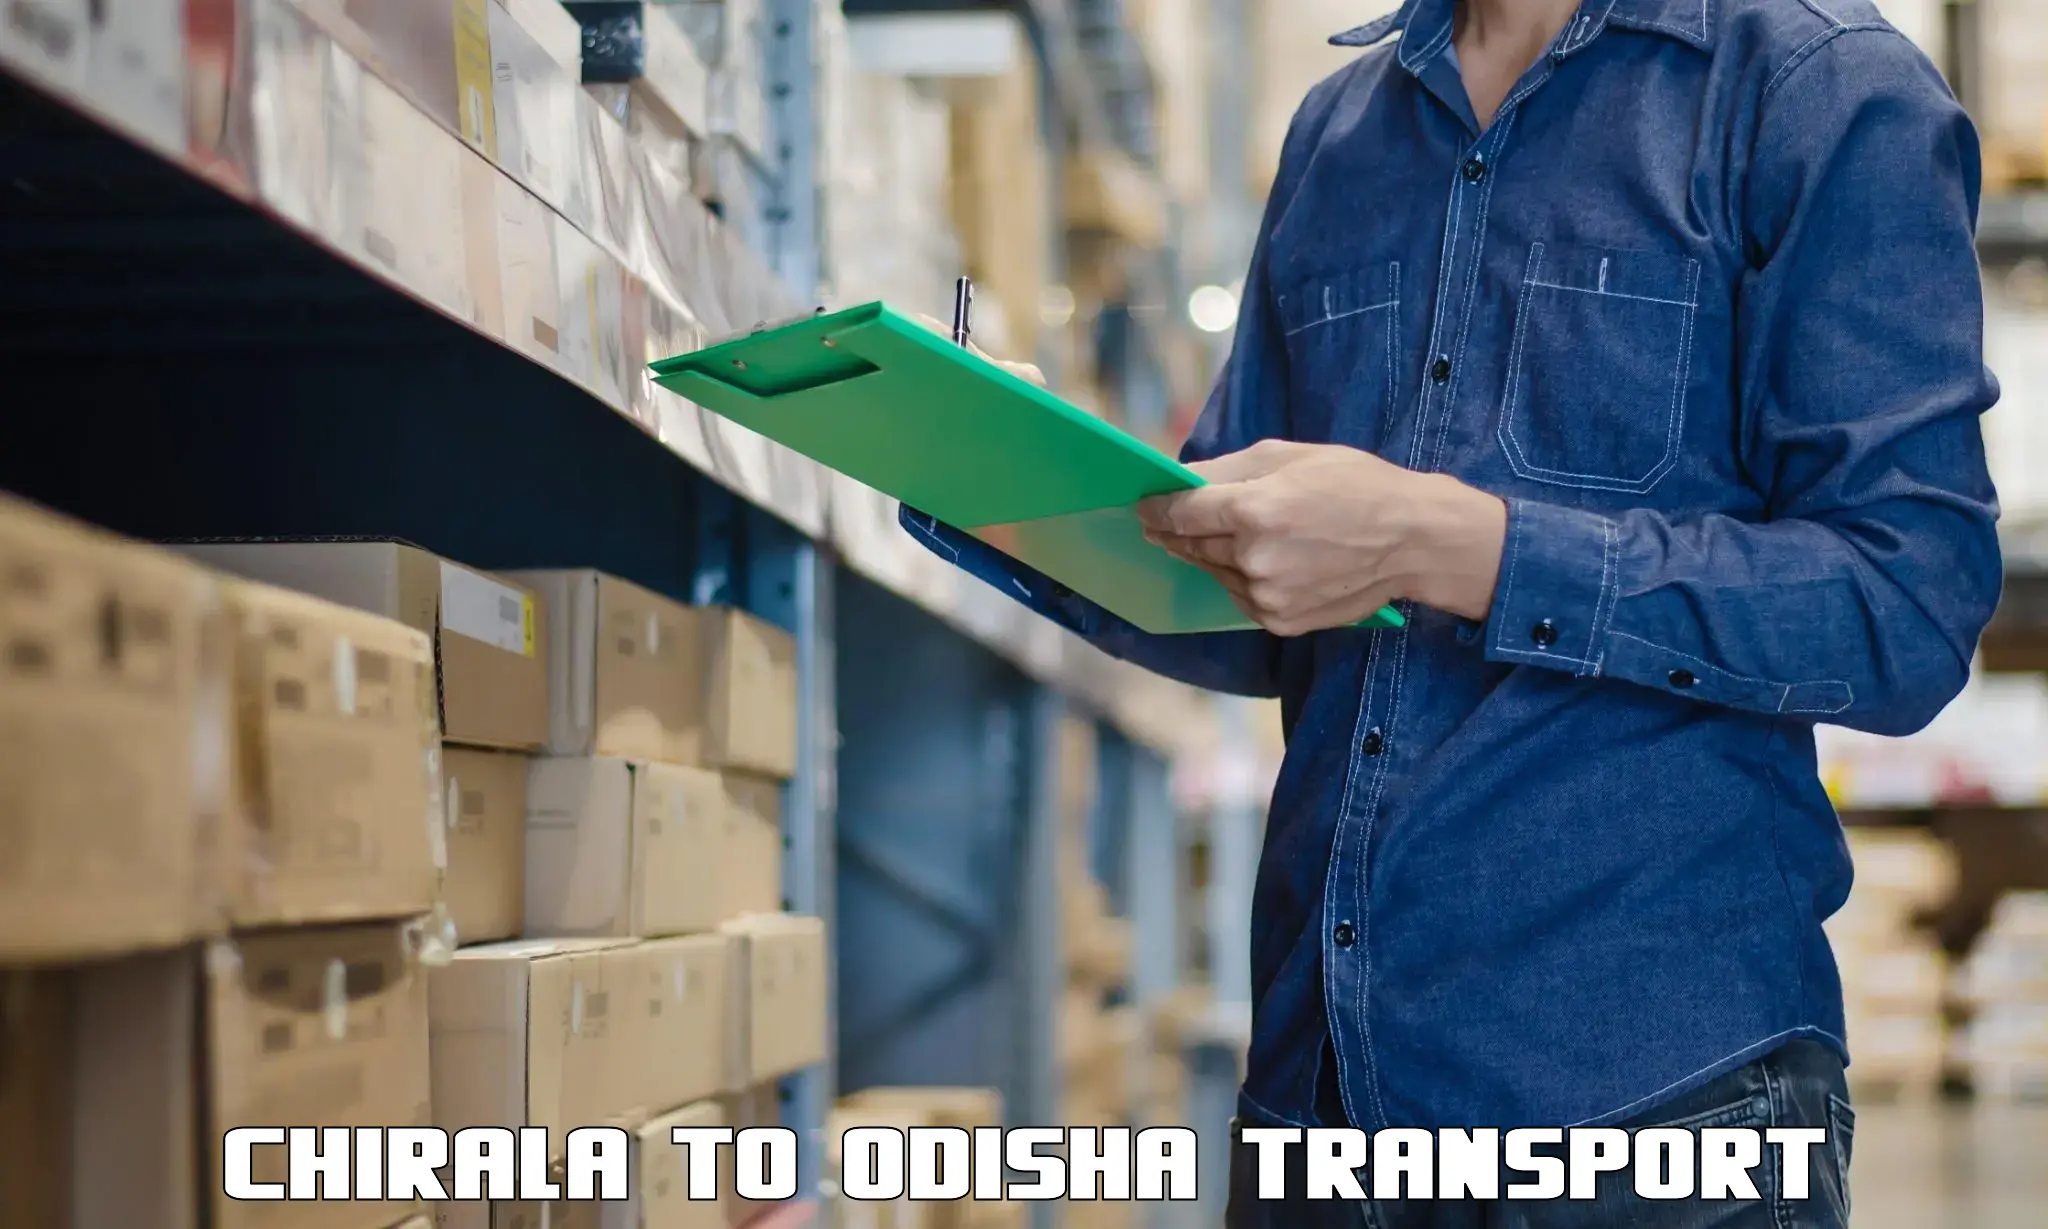 Container transport service Chirala to Chandinchowk